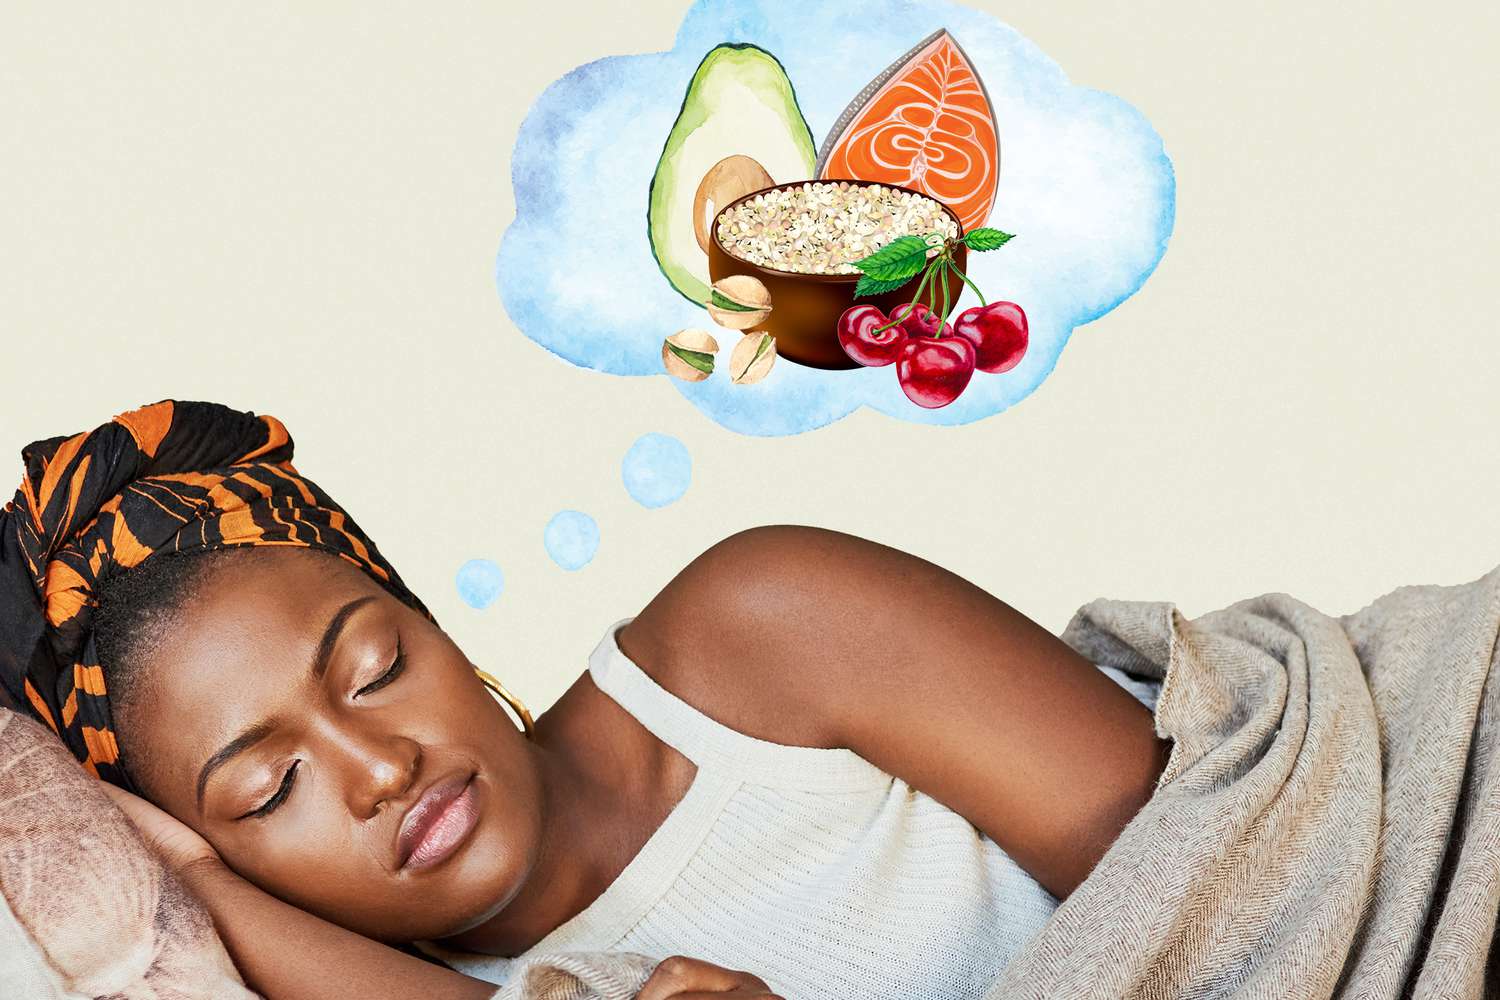 A woman sleeping with a thought bubble with food items from the Mediterranean diet